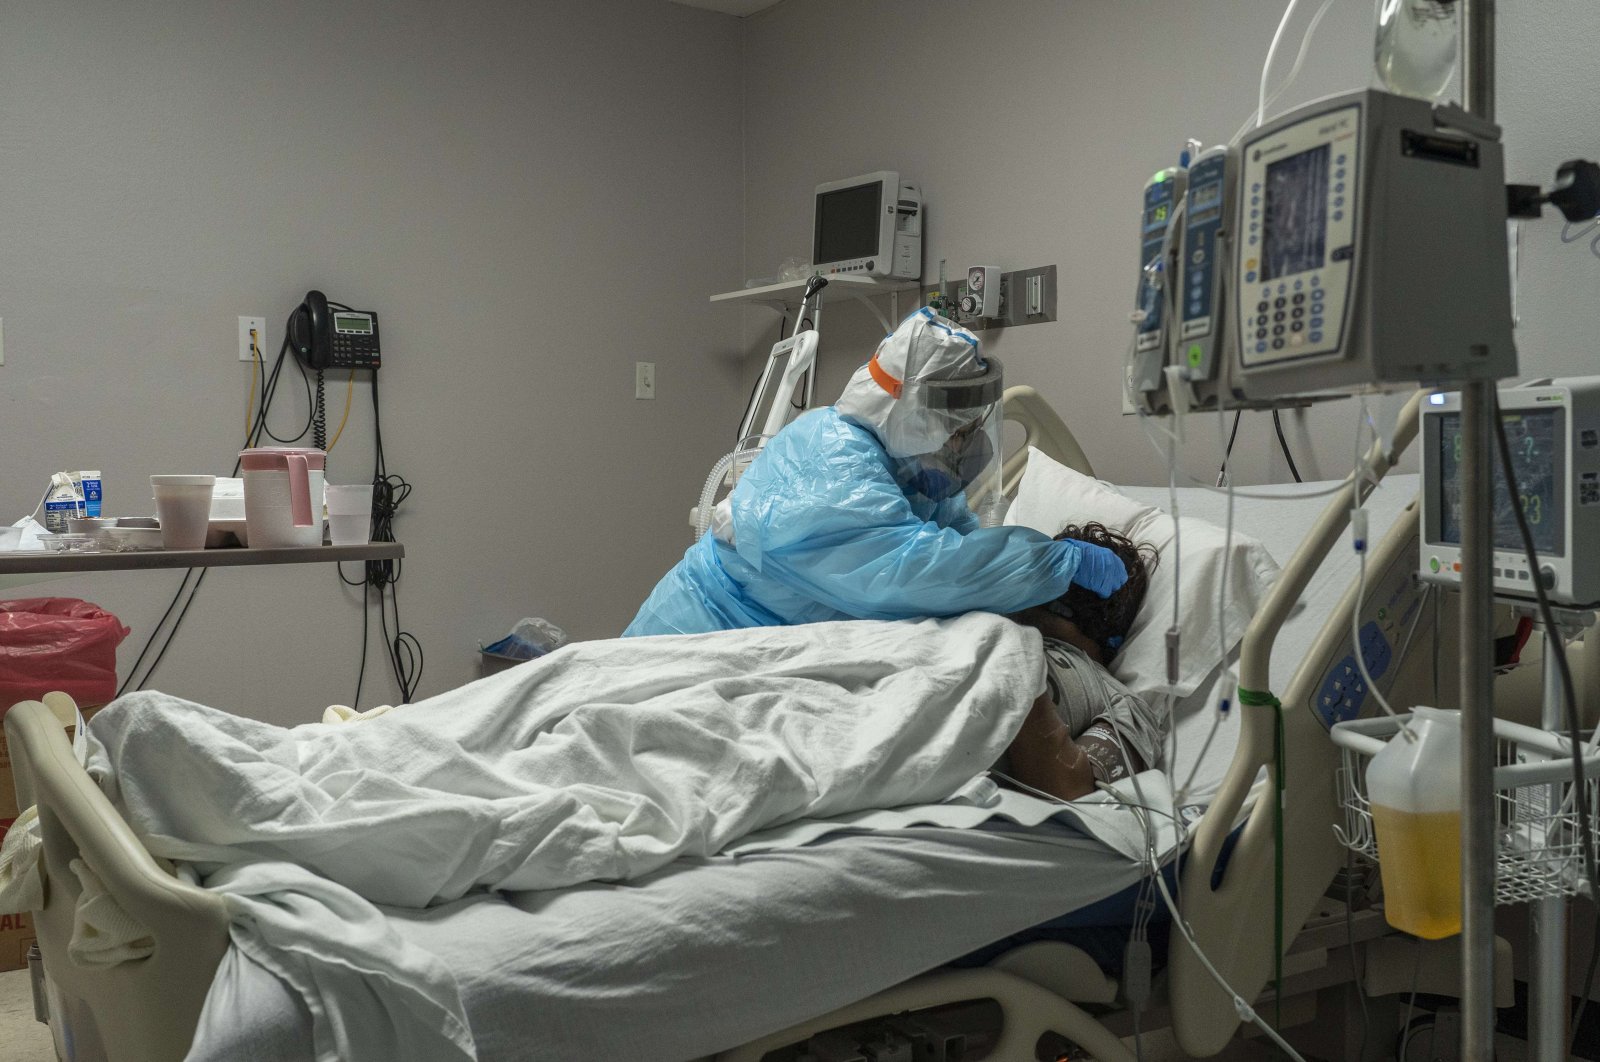 Medical staff member Mantra Nguyen installs a new oxygen mask for a patient in the COVID-19 intensive care unit (ICU) at the United Memorial Medical Center on Dec. 28, 2020 in Houston, Texas. (AFP Photo)